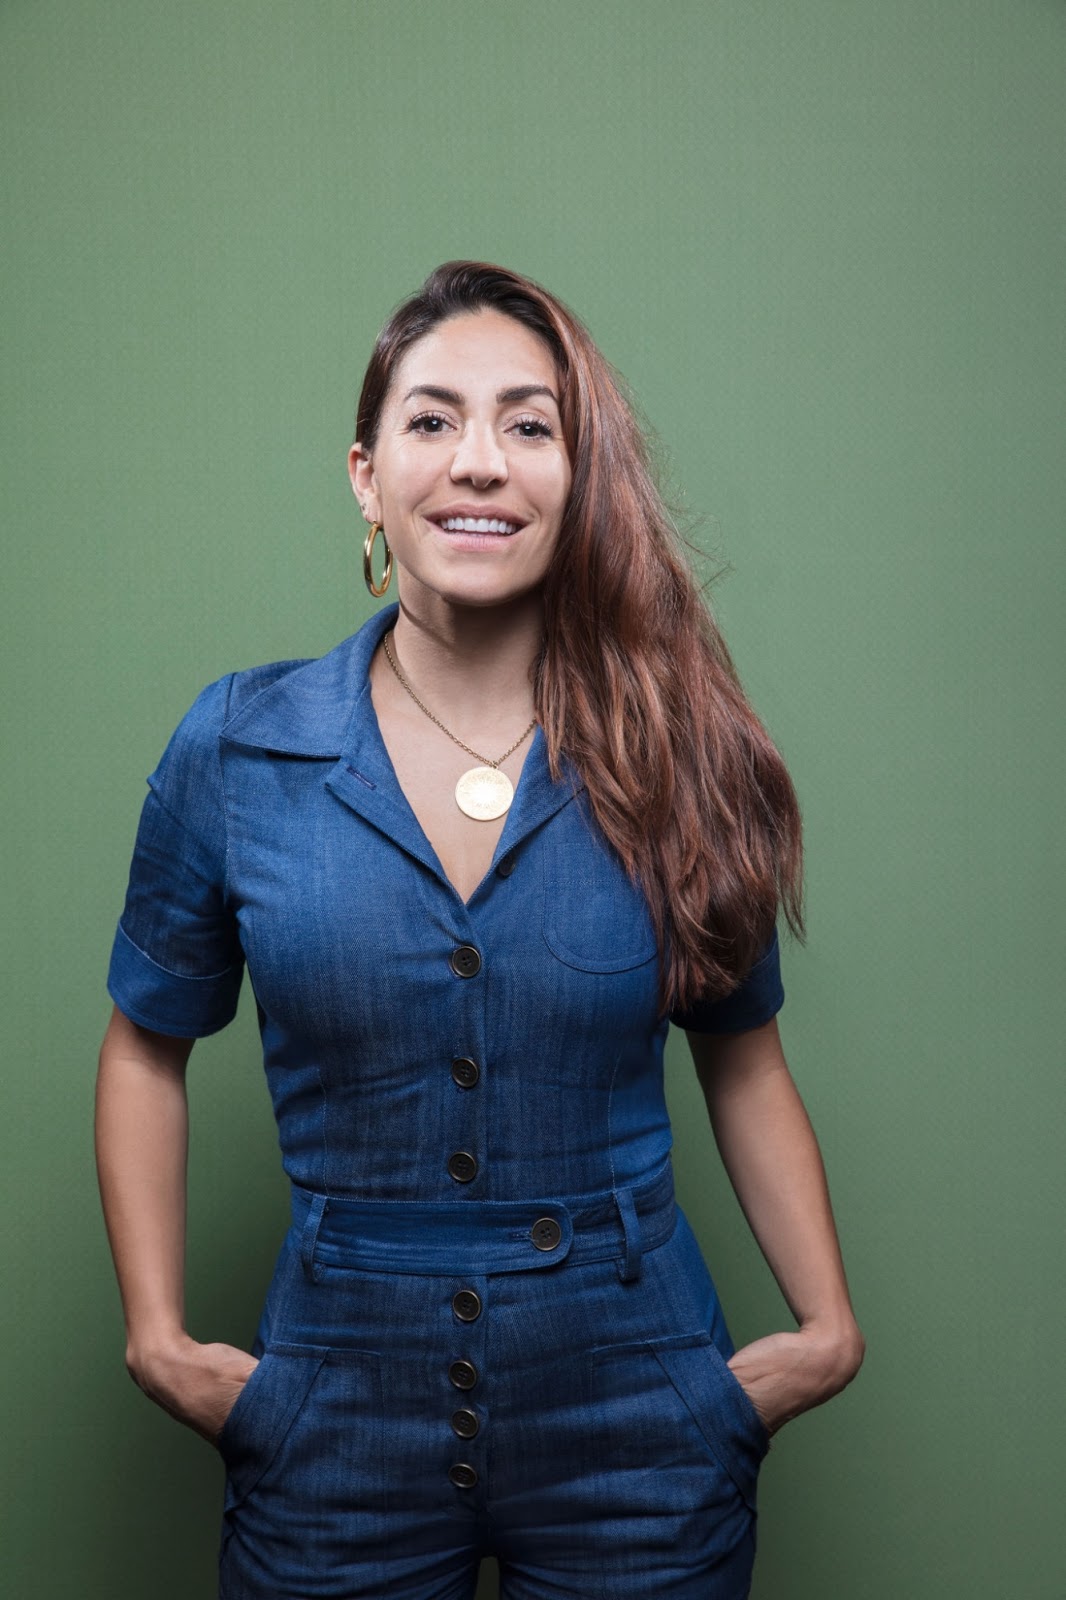 Natalia Cordova Buckley Photographed For Los Angeles Times In San